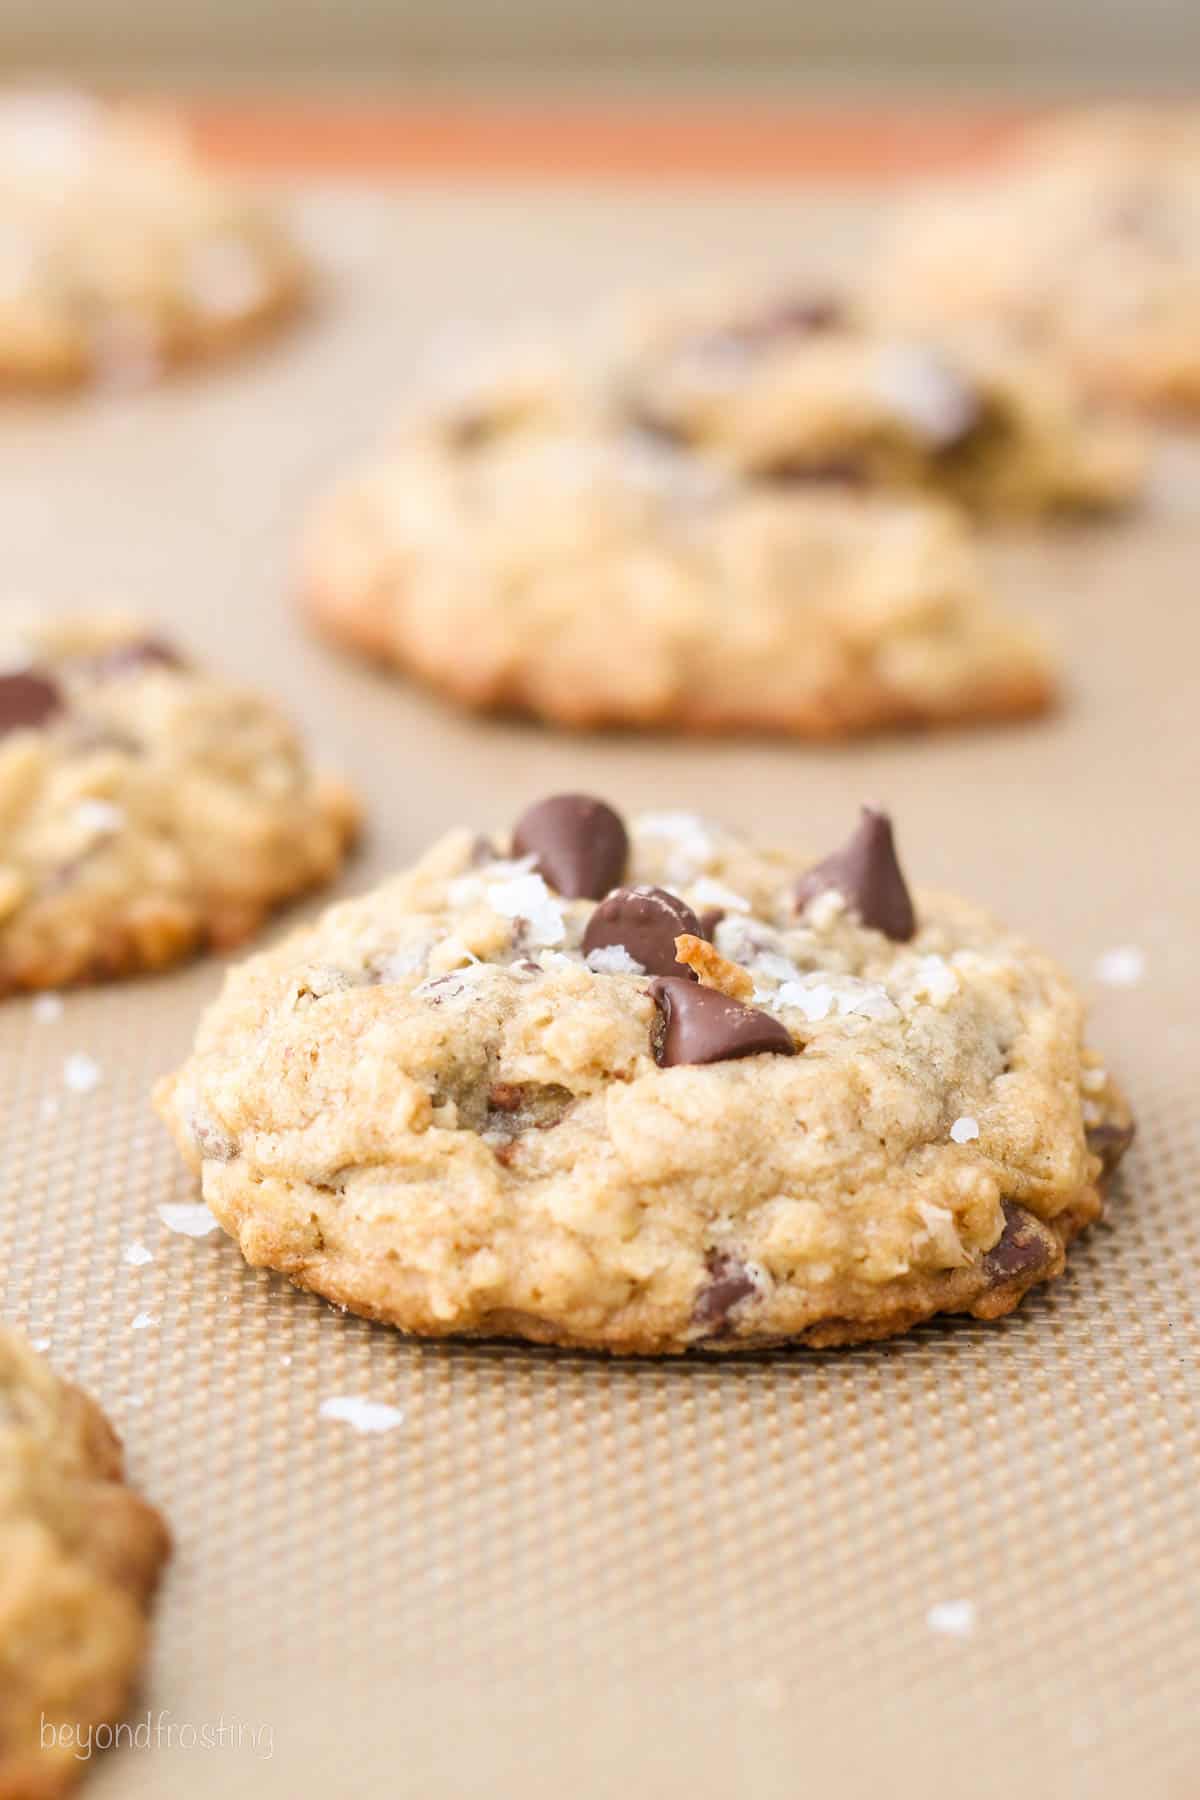 An example of a thick chocolate chip oatmeal cookie prepared with cold butter on a silicone lined baking sheet, with more cookies in the background.